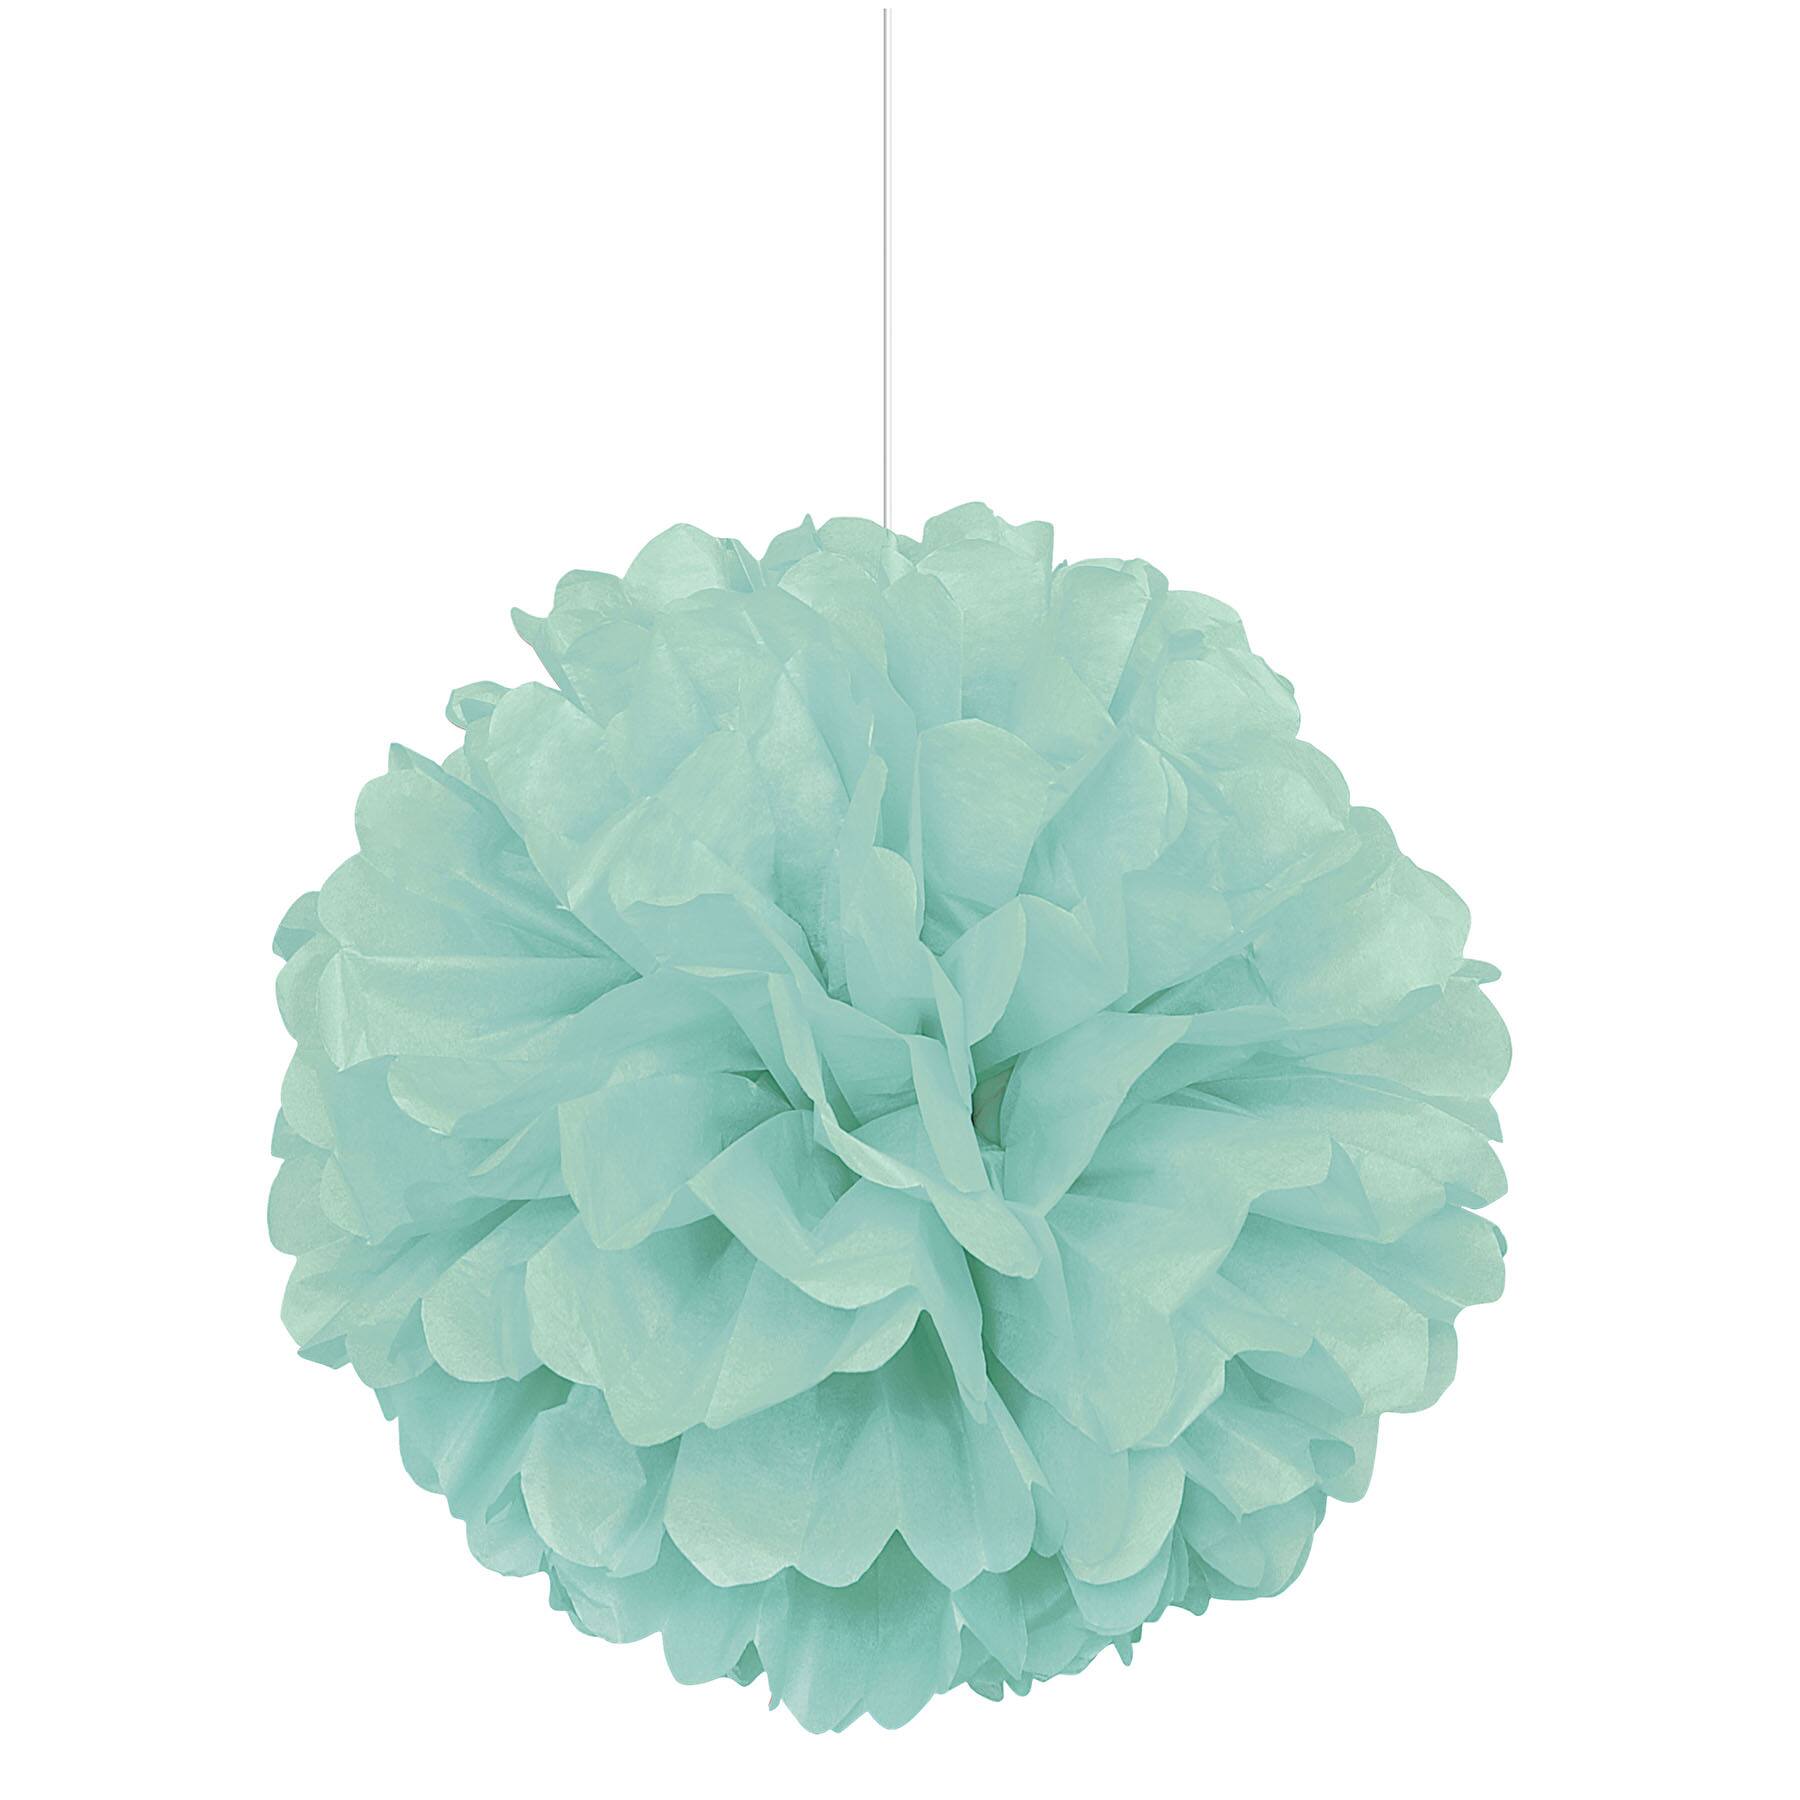 Maxim Omkostningsprocent foran Mint Tissue Paper Puff Ball Decoration | Mint Party Decorations